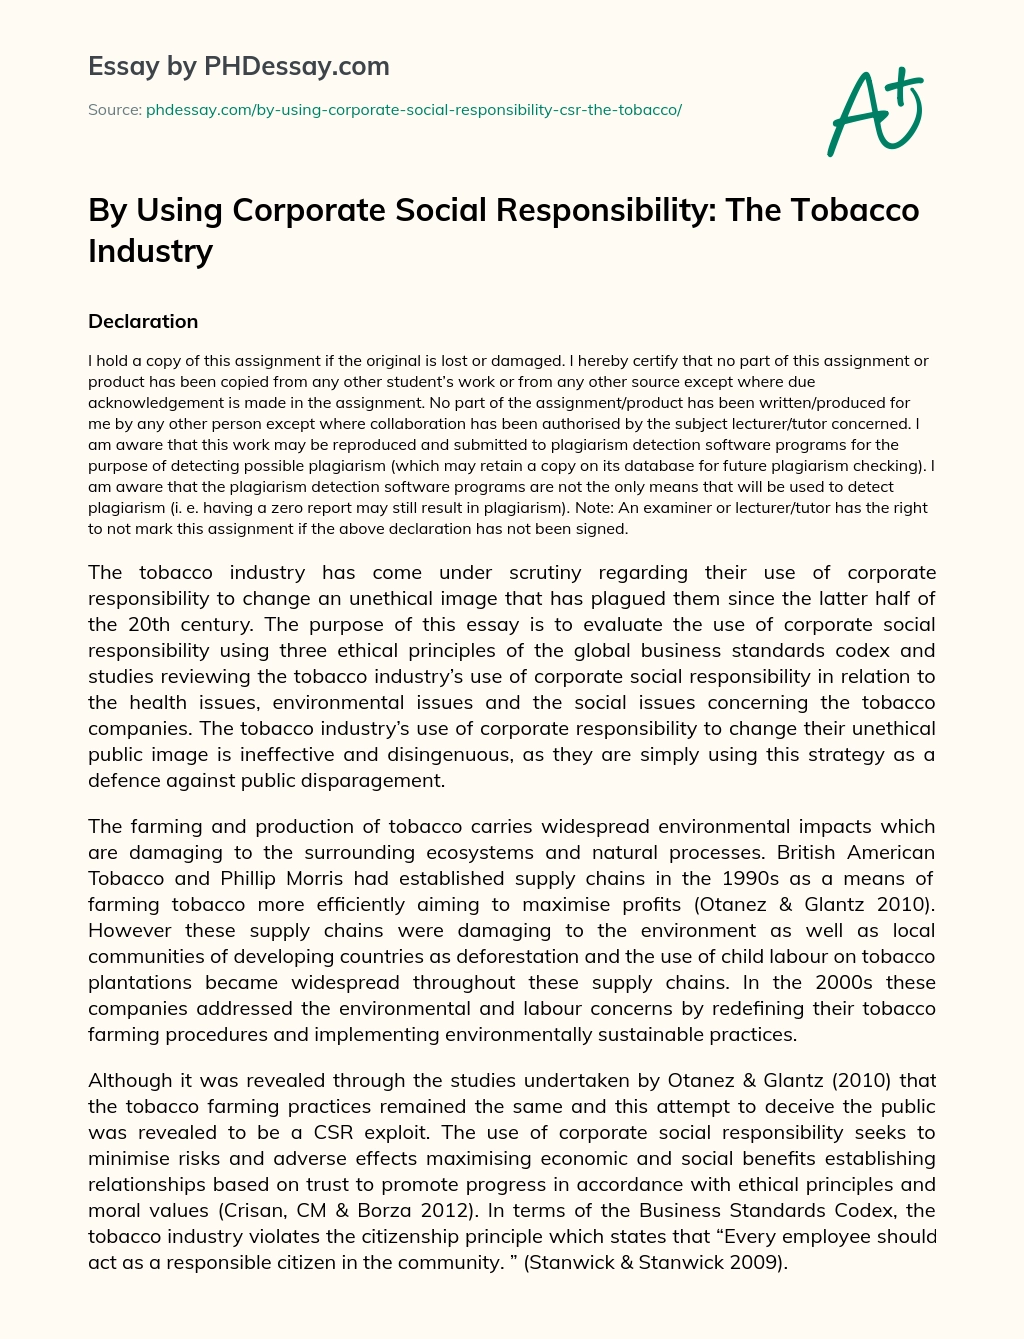 By Using Corporate Social Responsibility: The Tobacco Industry essay